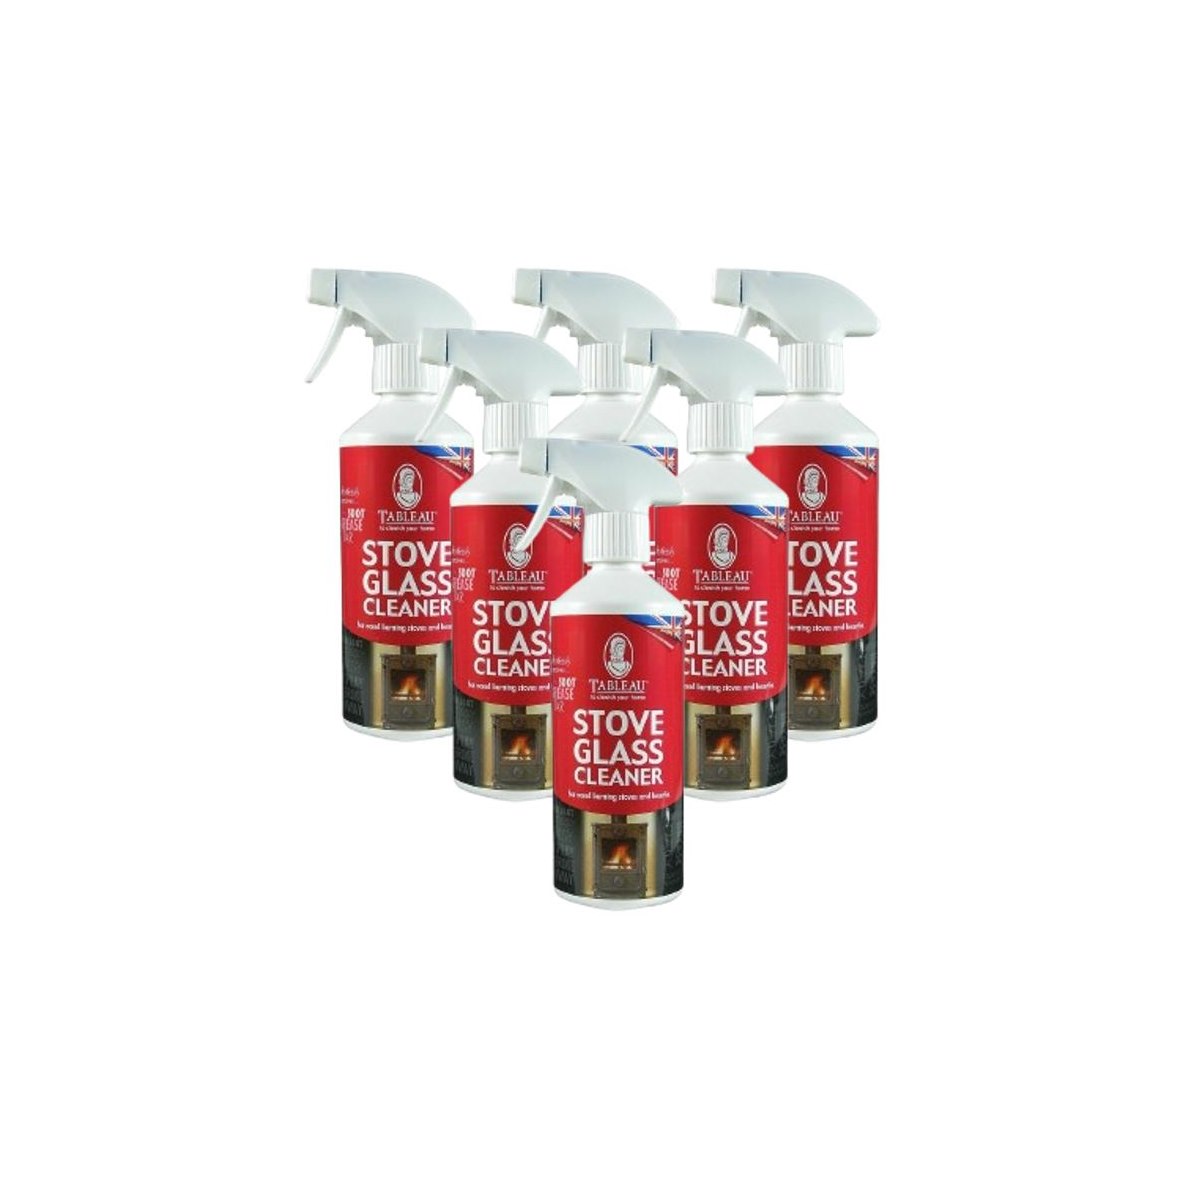 Case of 6 x Tableau Stove Glass Cleaner Spray 500ml